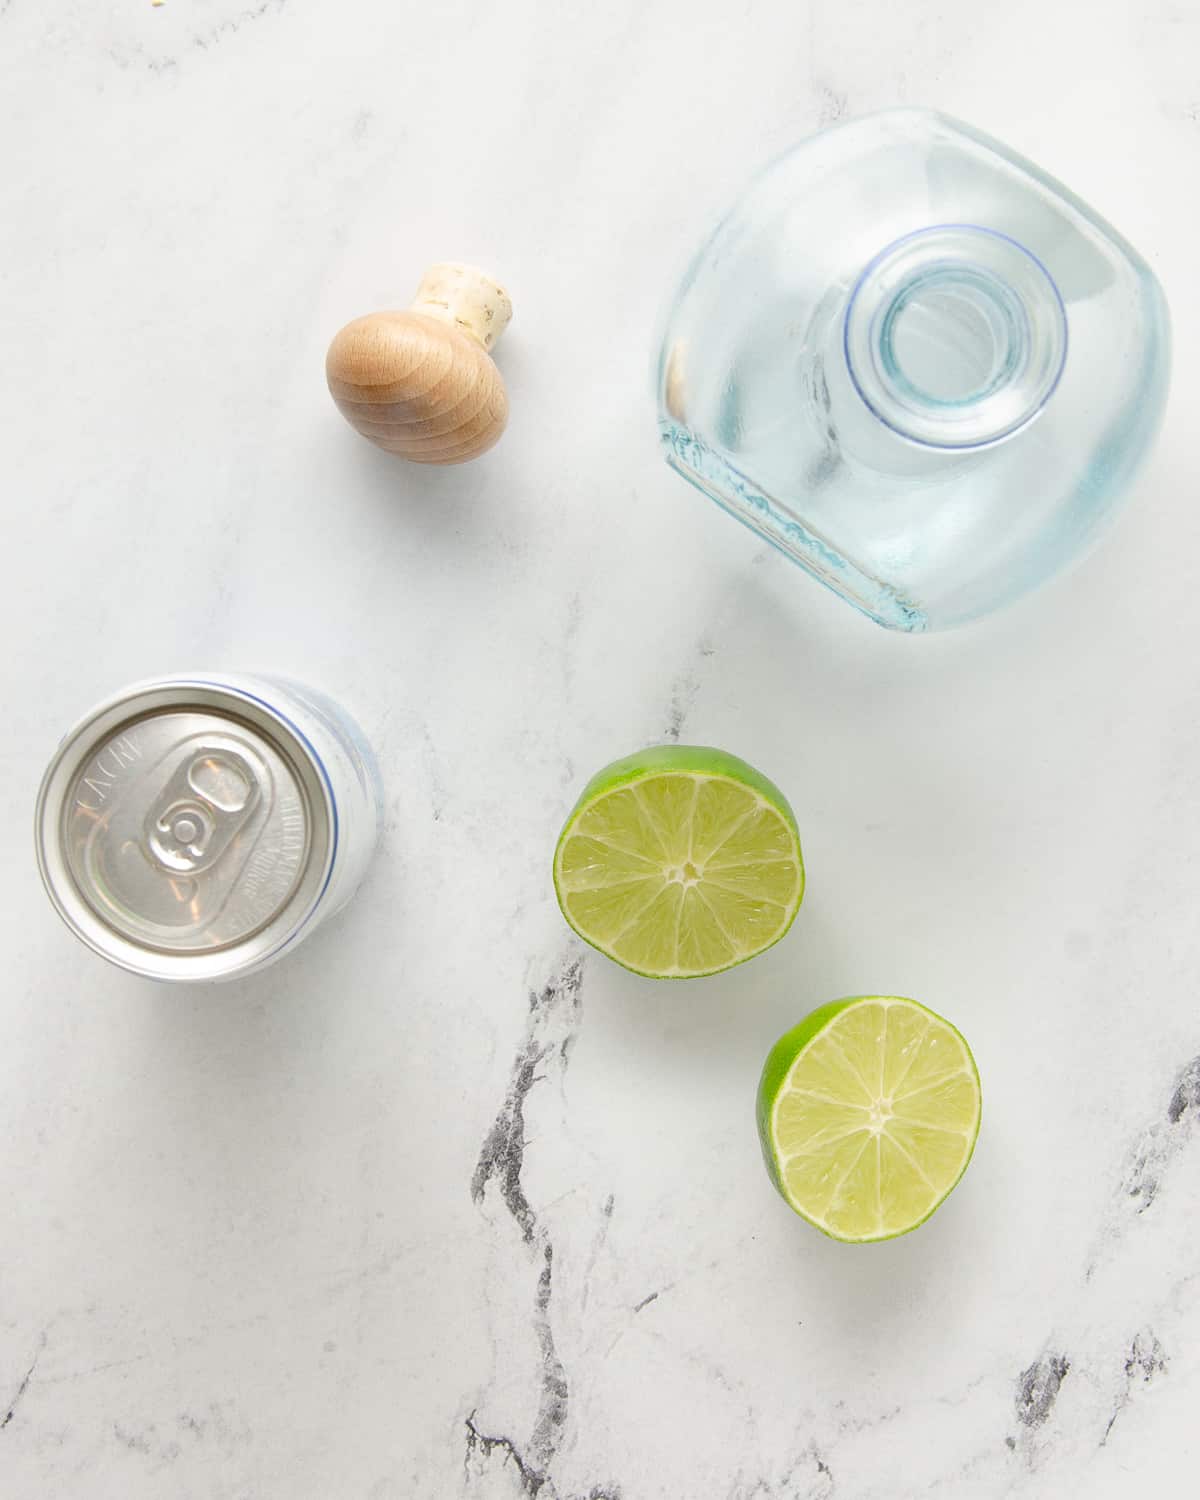 Ingredients to make a Mexican mule on marble: a lime, tequila bottle and can of ginger beer.